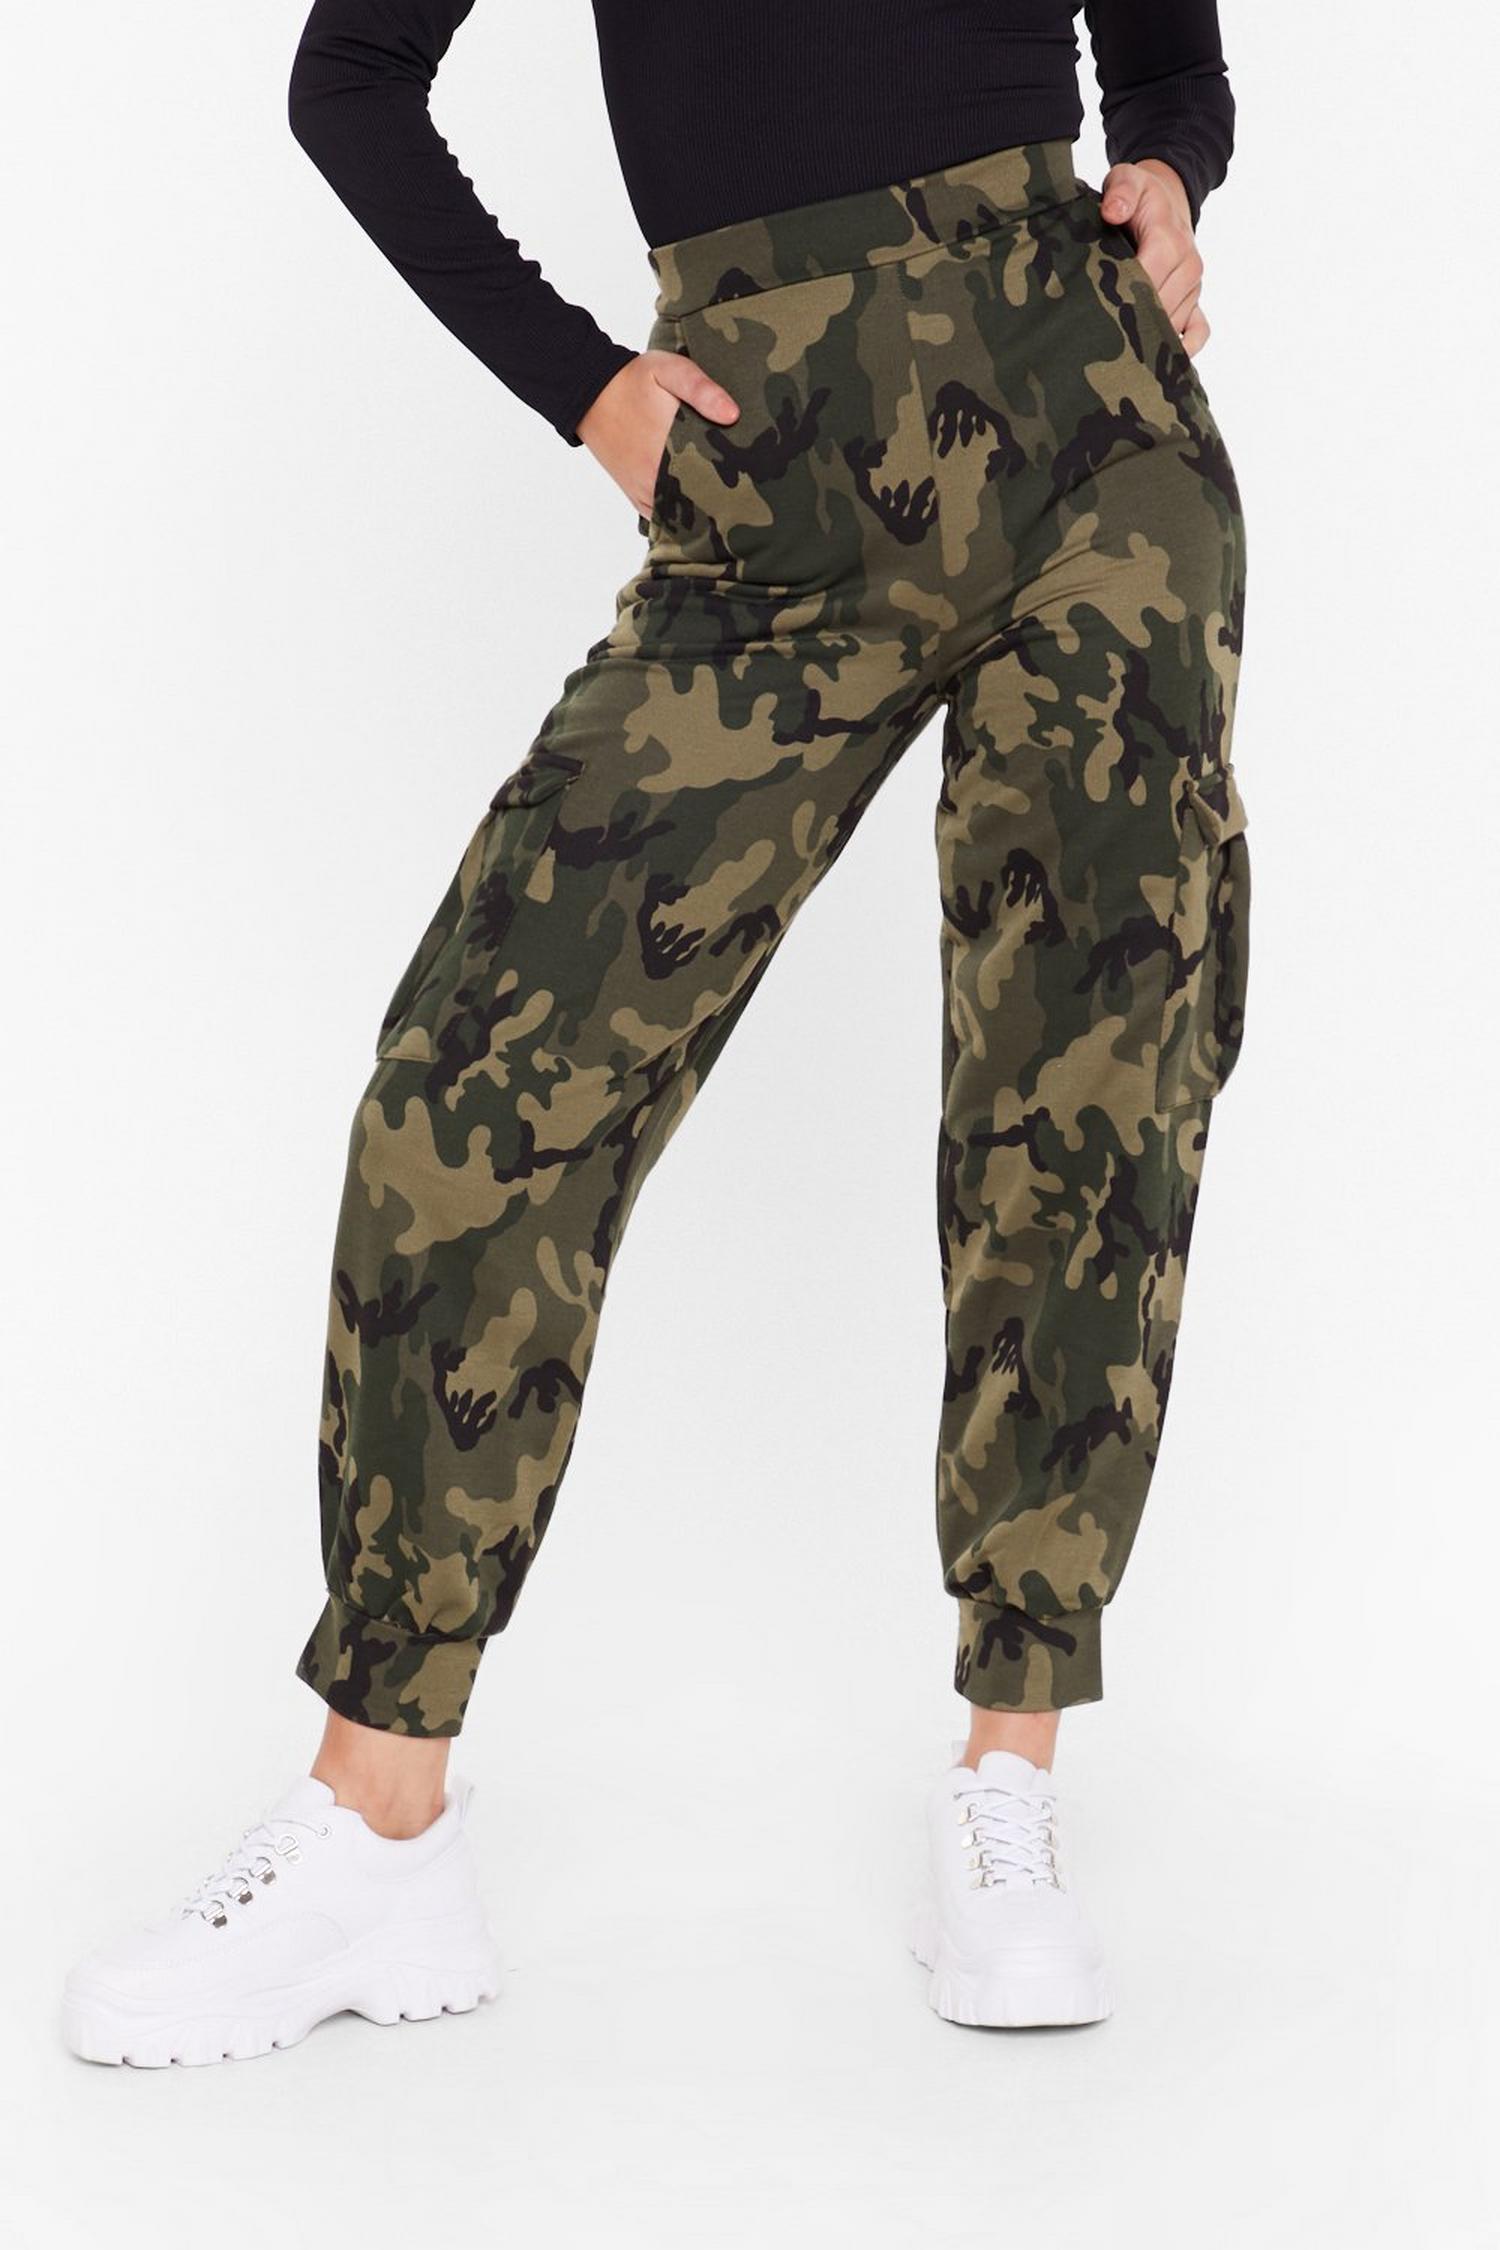 March On Camo High-Waisted Joggers | Nasty Gal